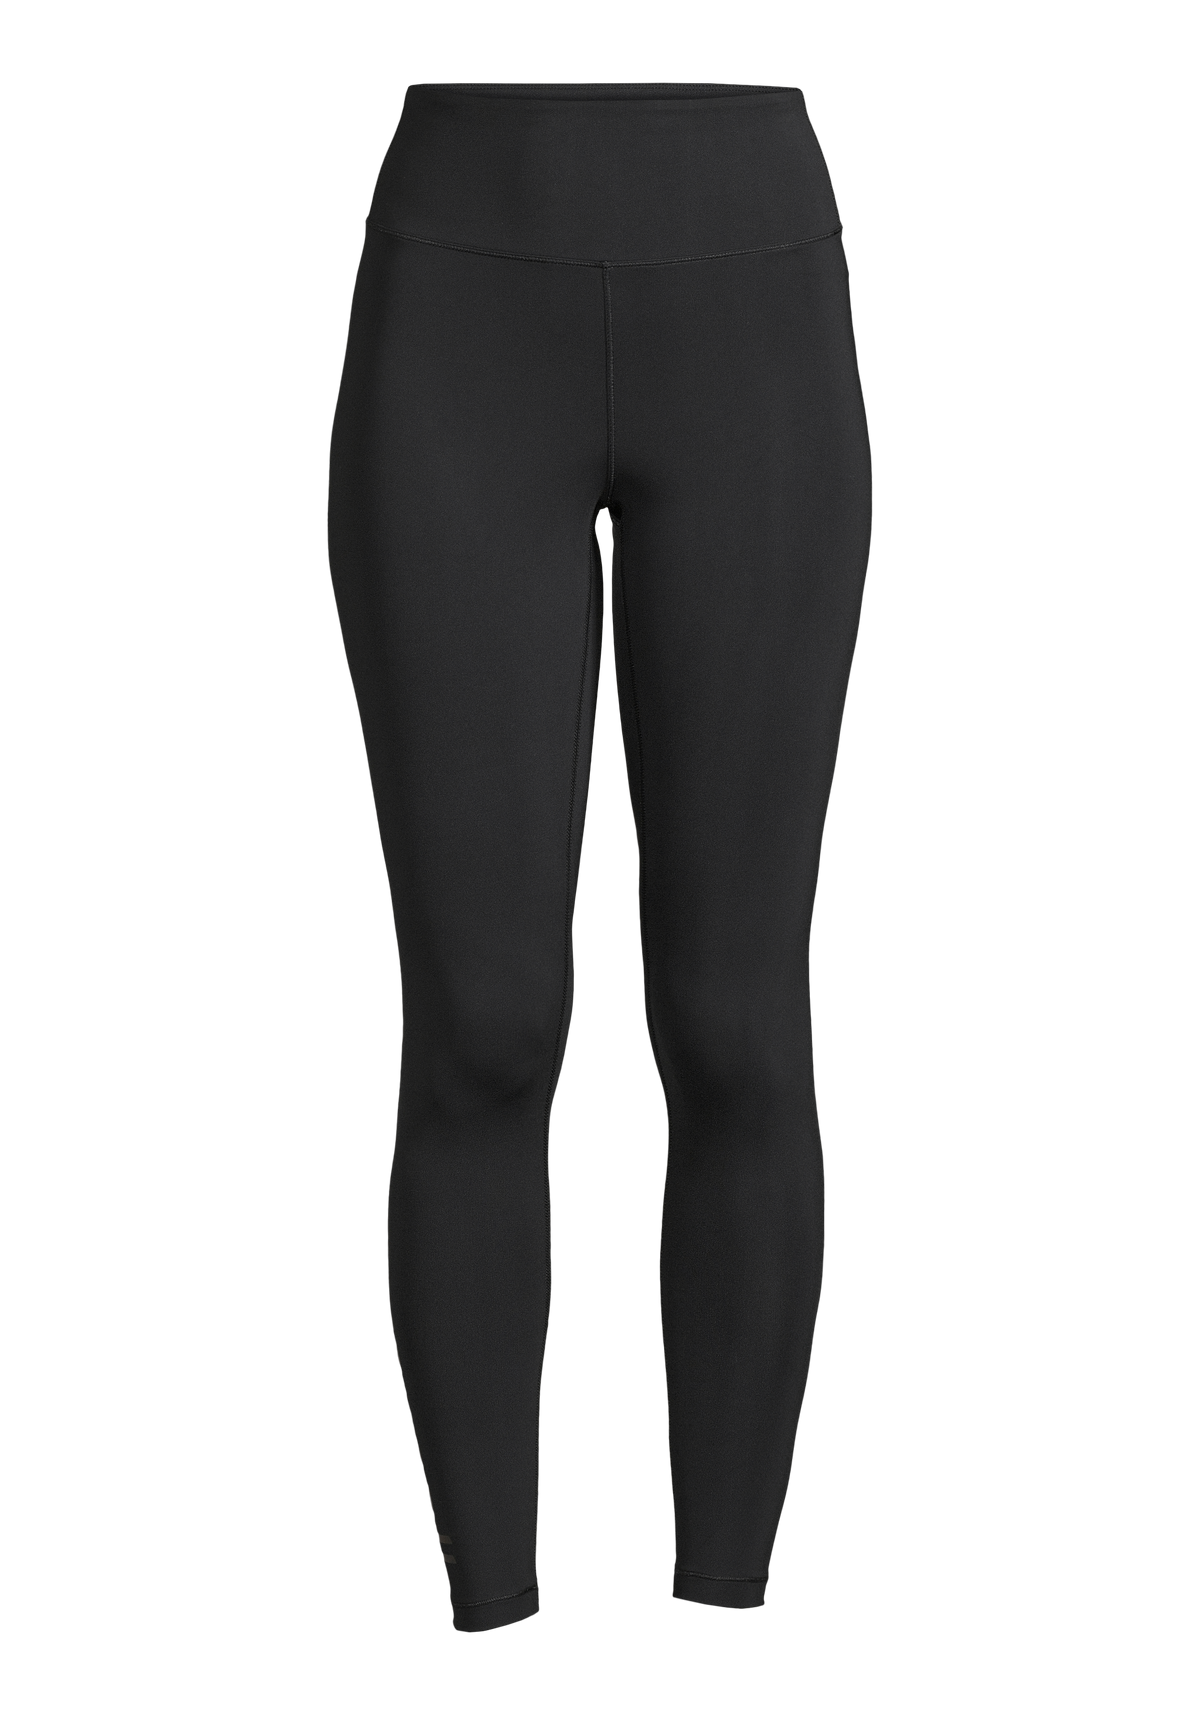 Casall Graphic Sport Tights